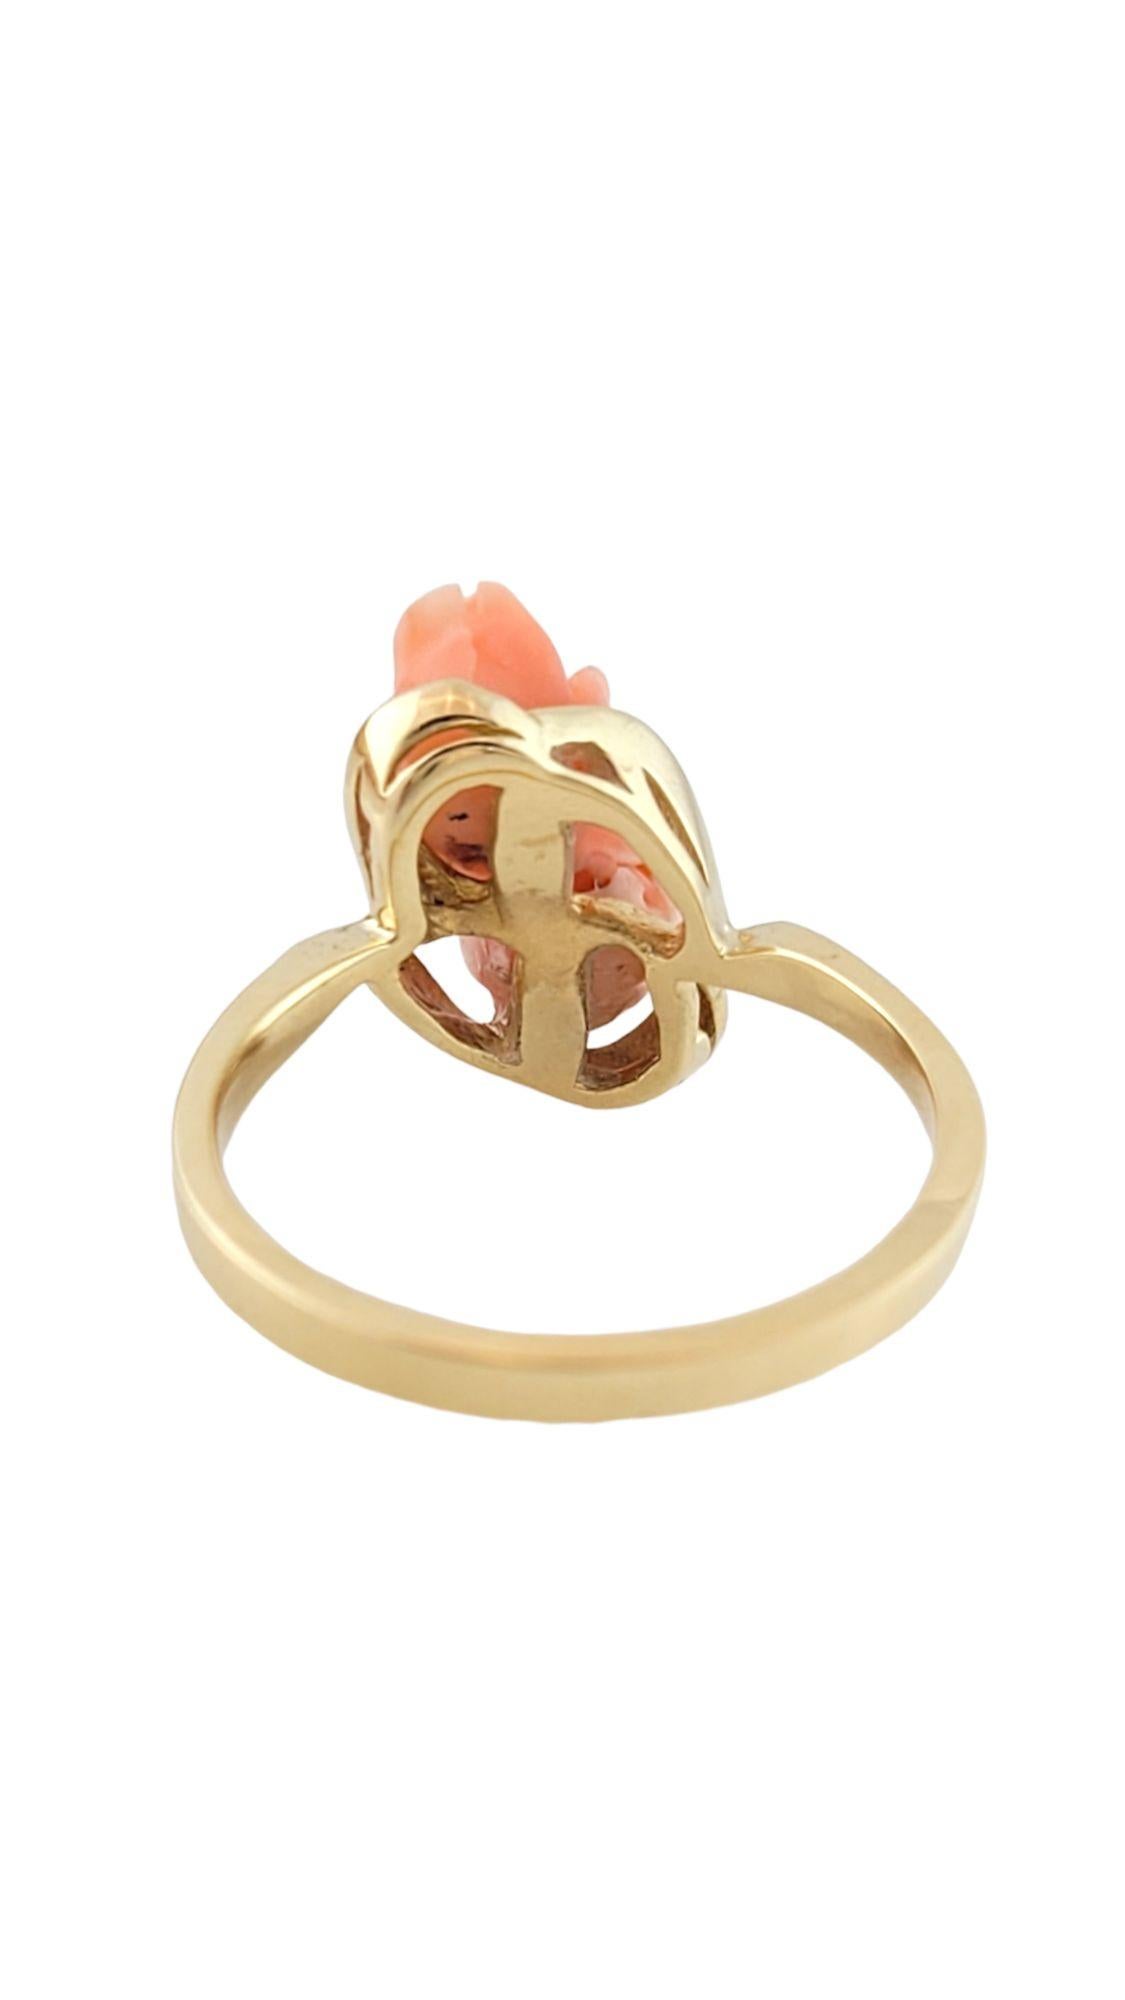 Women's 10K Yellow Gold Coral Rose Ring Size 6.5 #14611 For Sale